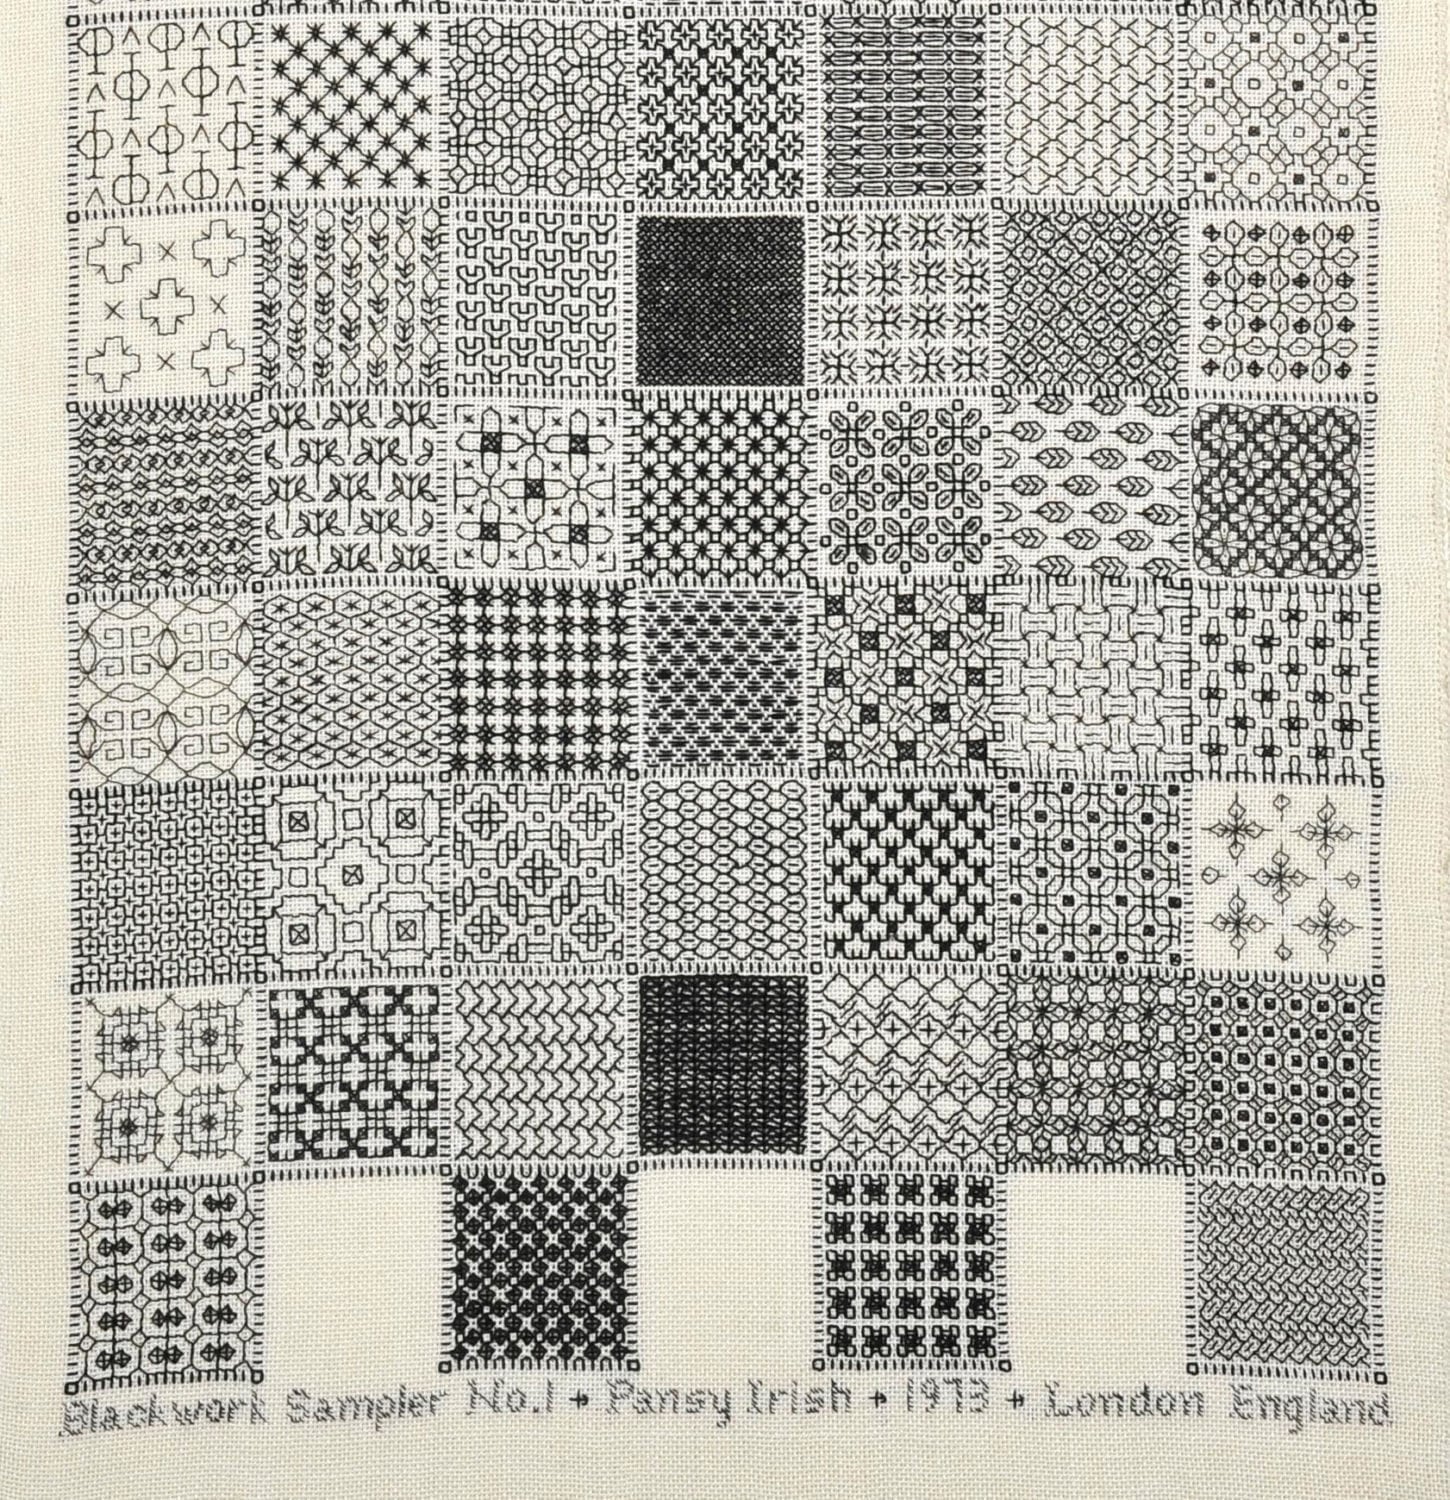 RSN Collection "Section from a Blackwork Stitch Sampler", worked by Pansy Irish in 1973